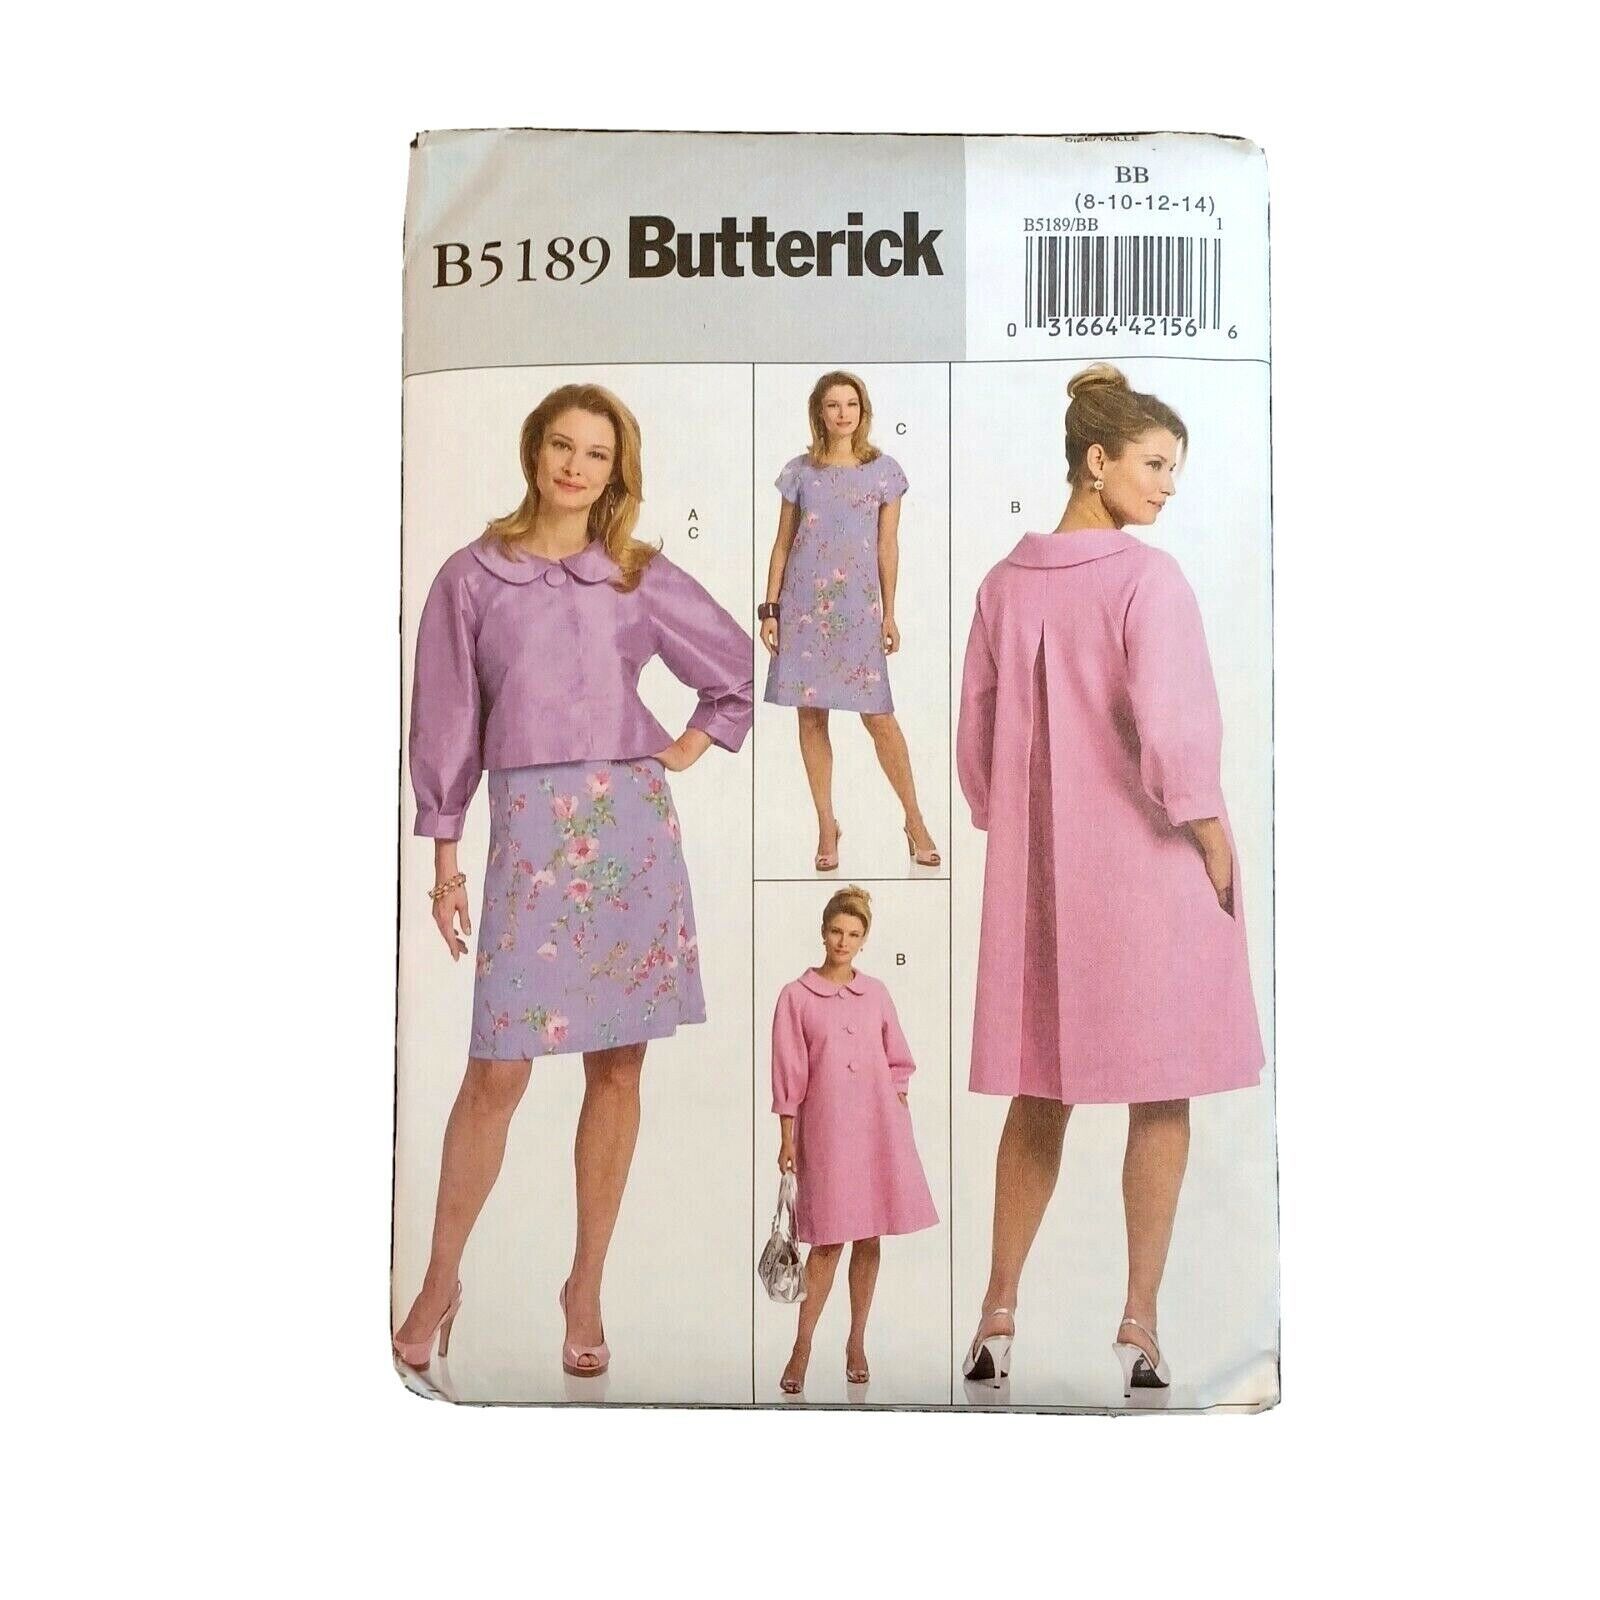 Primary image for Butterick B5189 Misses Jacket Coat Dress Sewing Pattern Sizes 8-14 Uncut UC